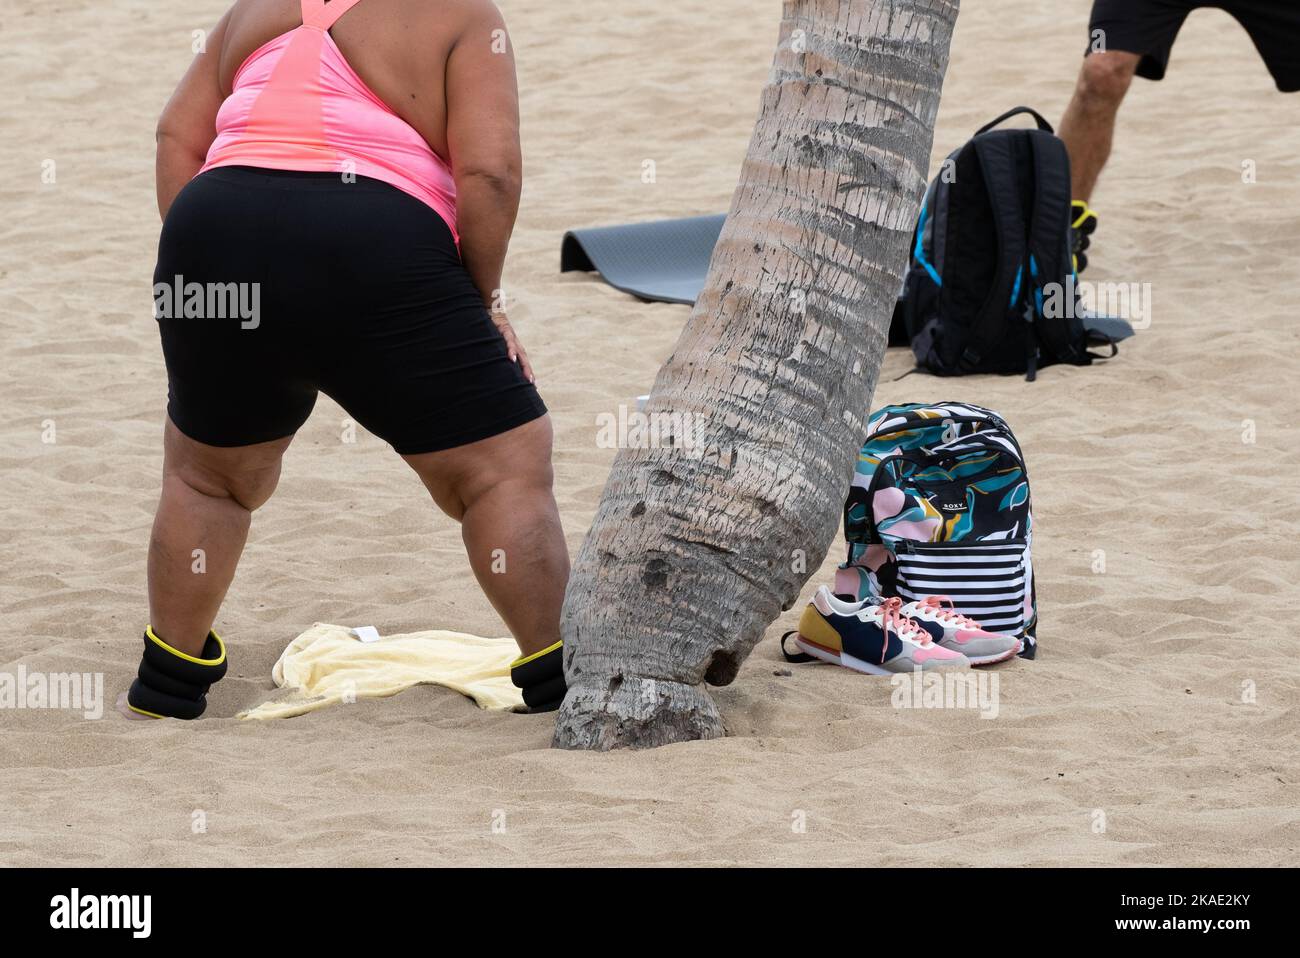 Obese woman wearing ankle weights exercising on beach in Spain Stock Photo